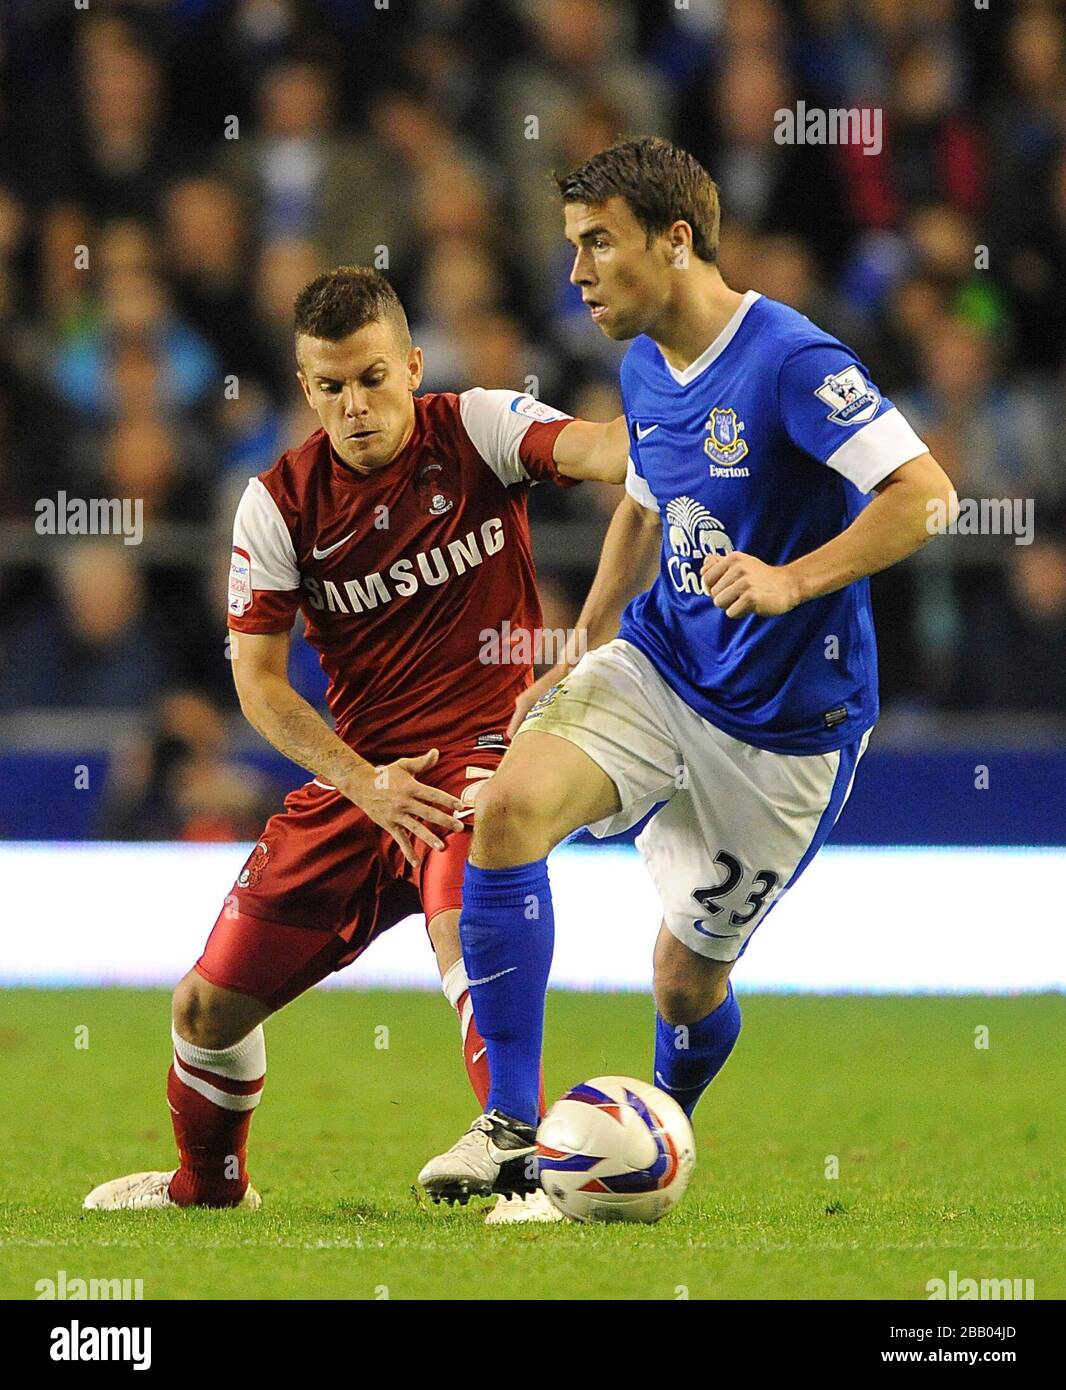 Leyton Orient's Dean Cox (left) and Everton's Seamus Coleman battle for the ball Stock Photo